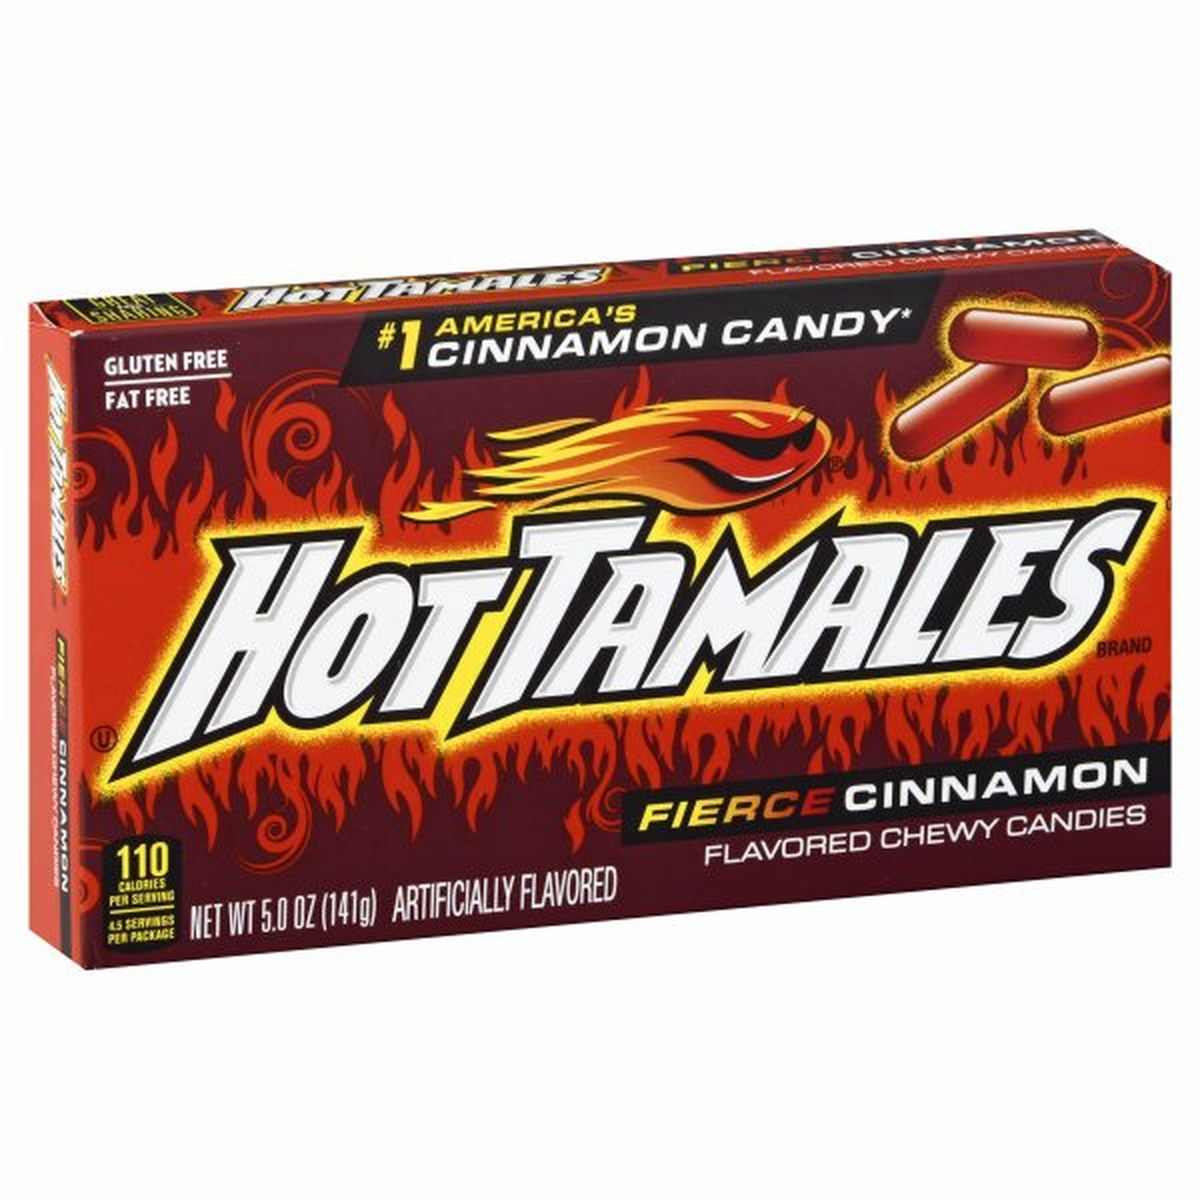 Calories in Hot Tamaless Candy, Fierce Cinnamon